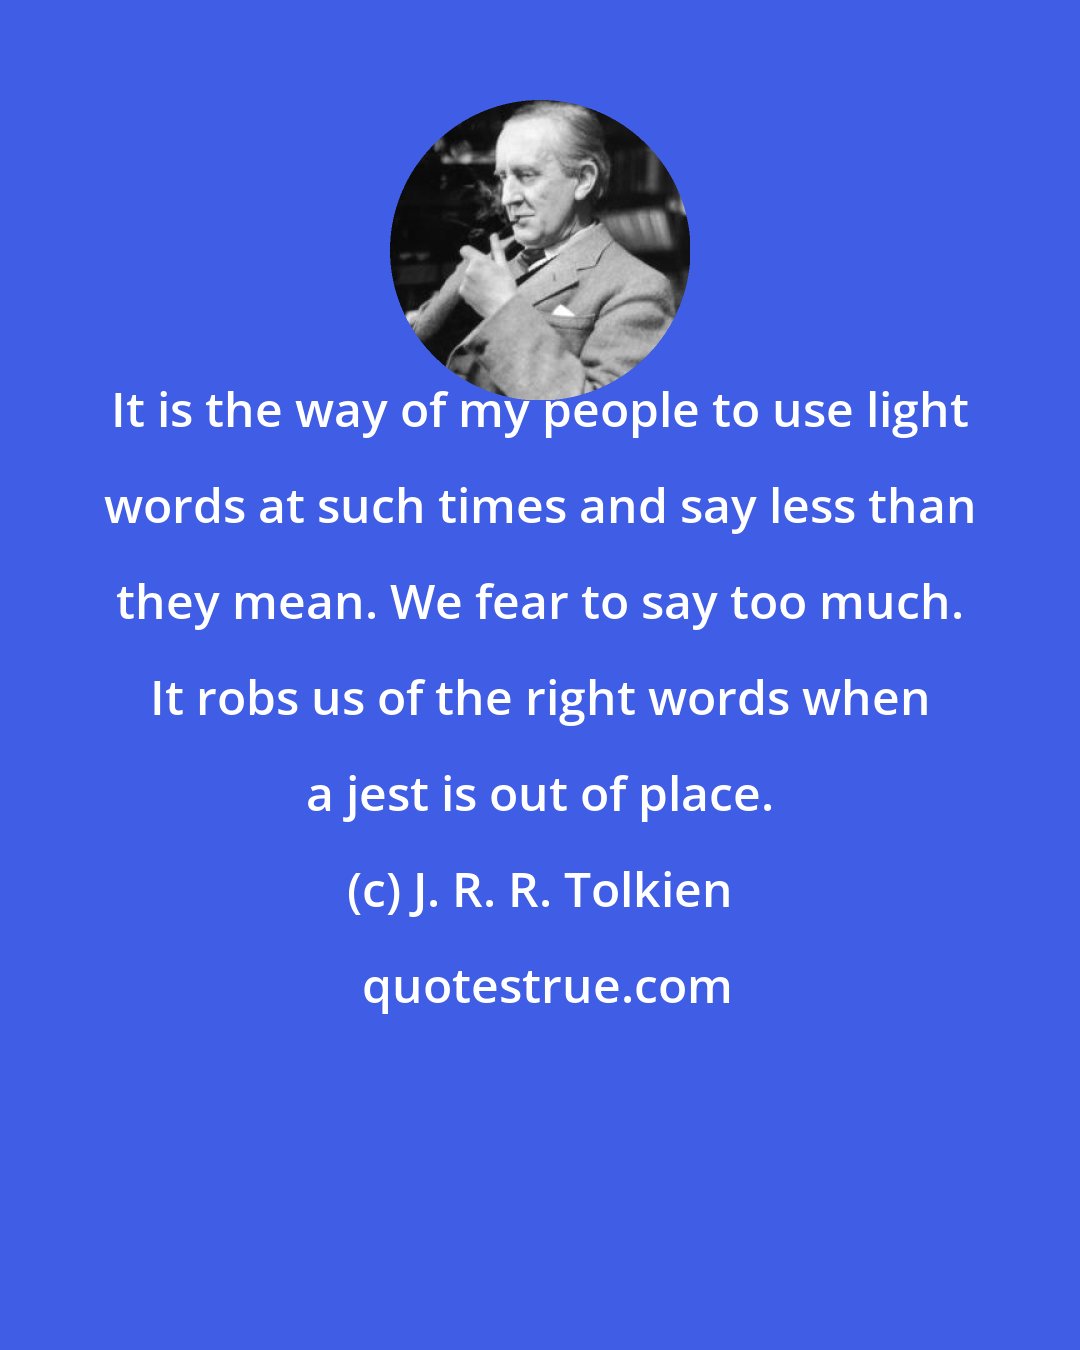 J. R. R. Tolkien: It is the way of my people to use light words at such times and say less than they mean. We fear to say too much. It robs us of the right words when a jest is out of place.